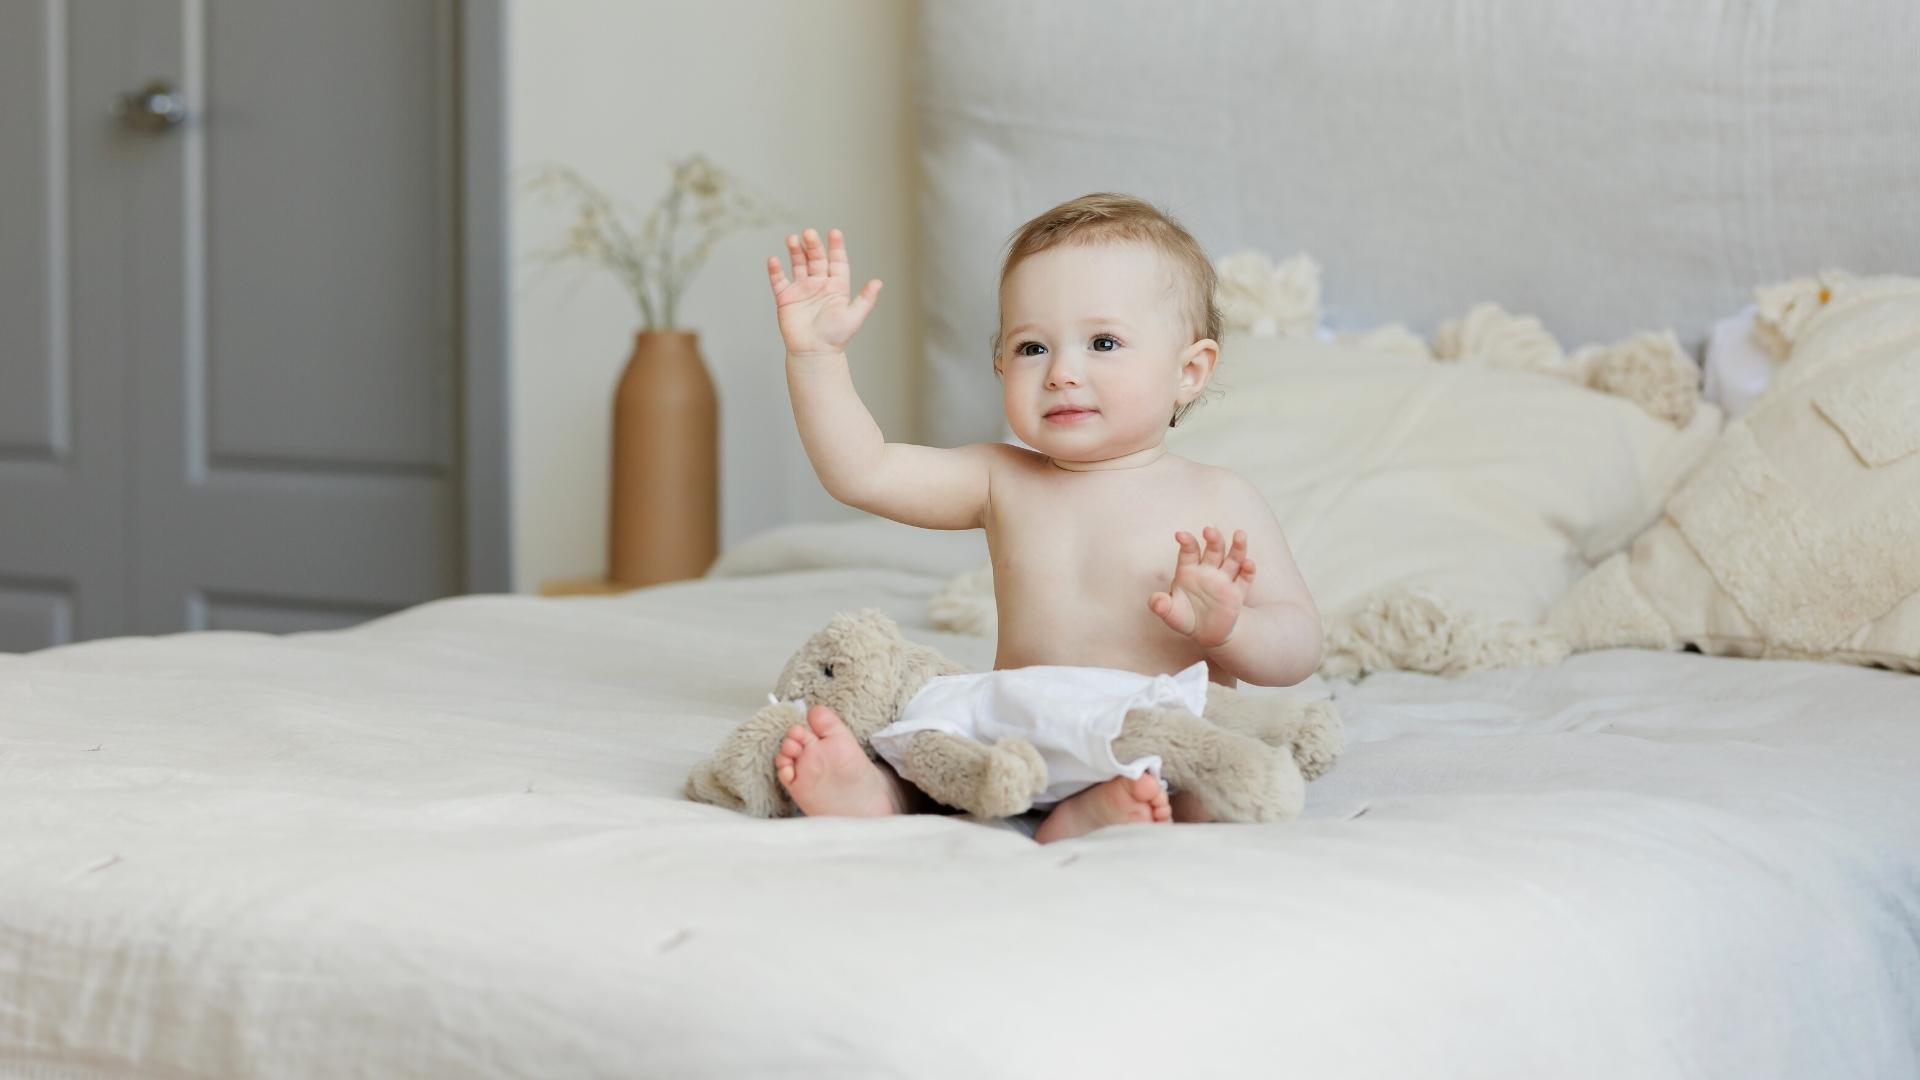 When Do Babies Sit Up From Lying Down? 5 Steps To Look For!